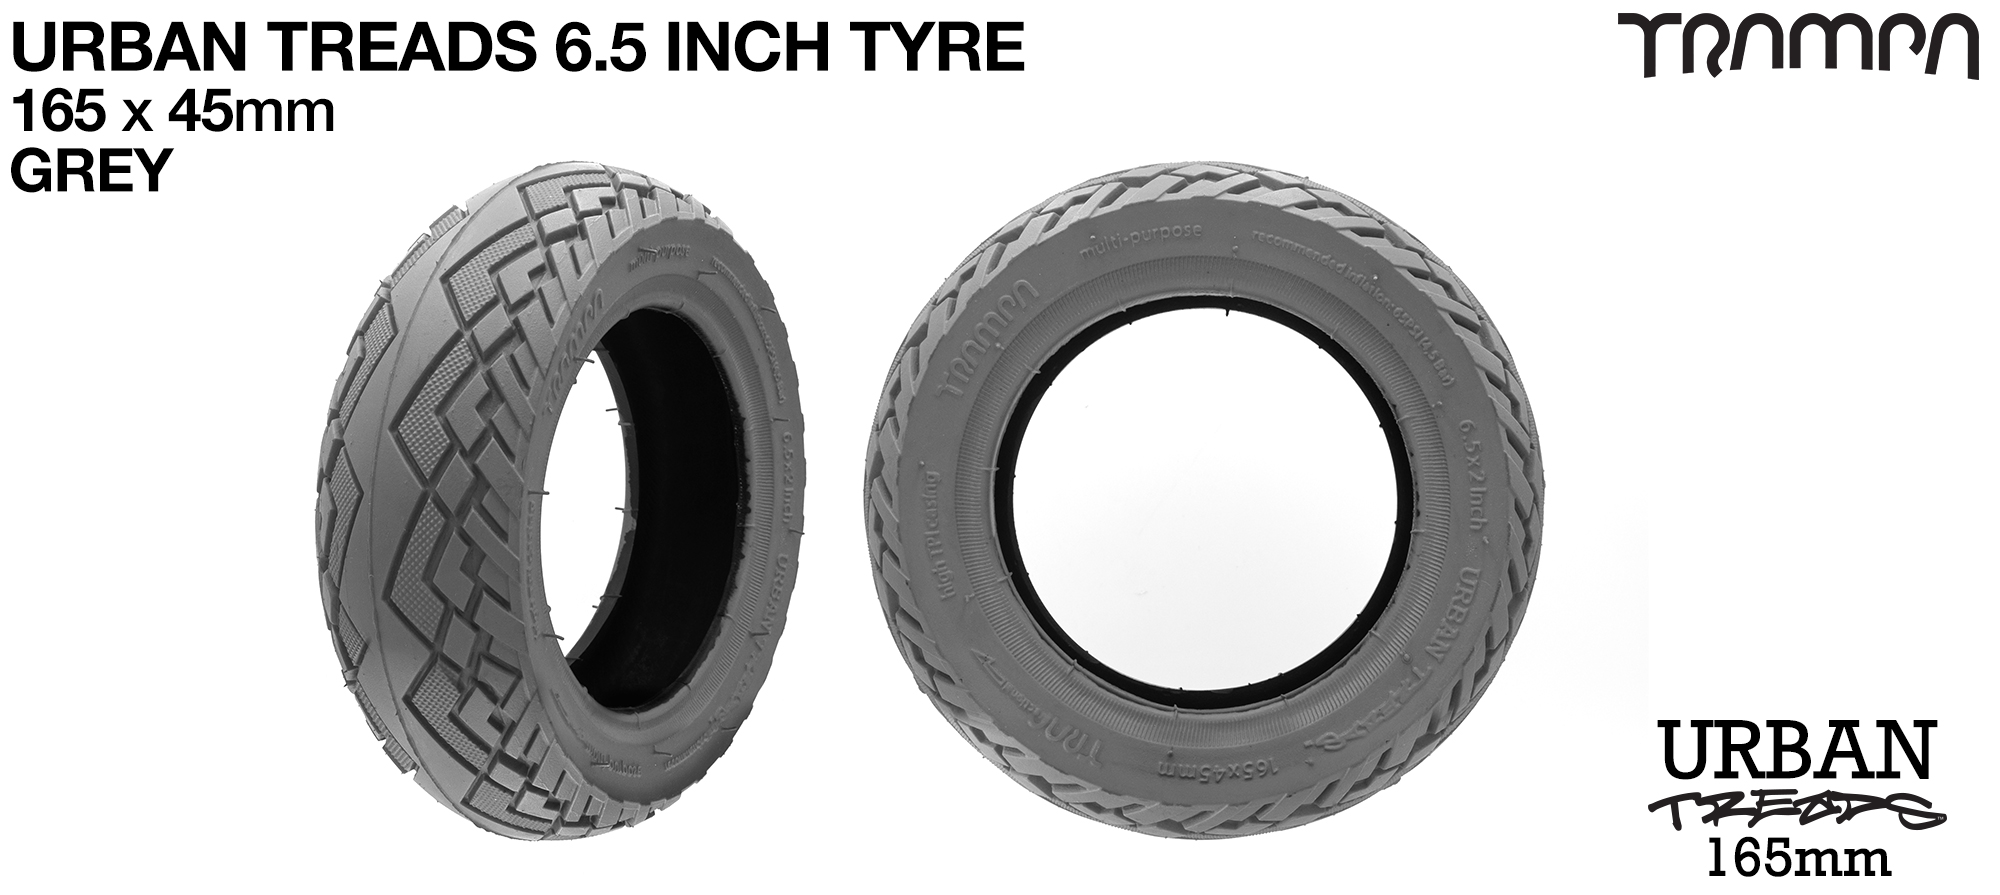 6 Inch Tyre TRAMPA URBAN TREADS is the perfect all round tyre for Urban & City riding - DARK GREY  